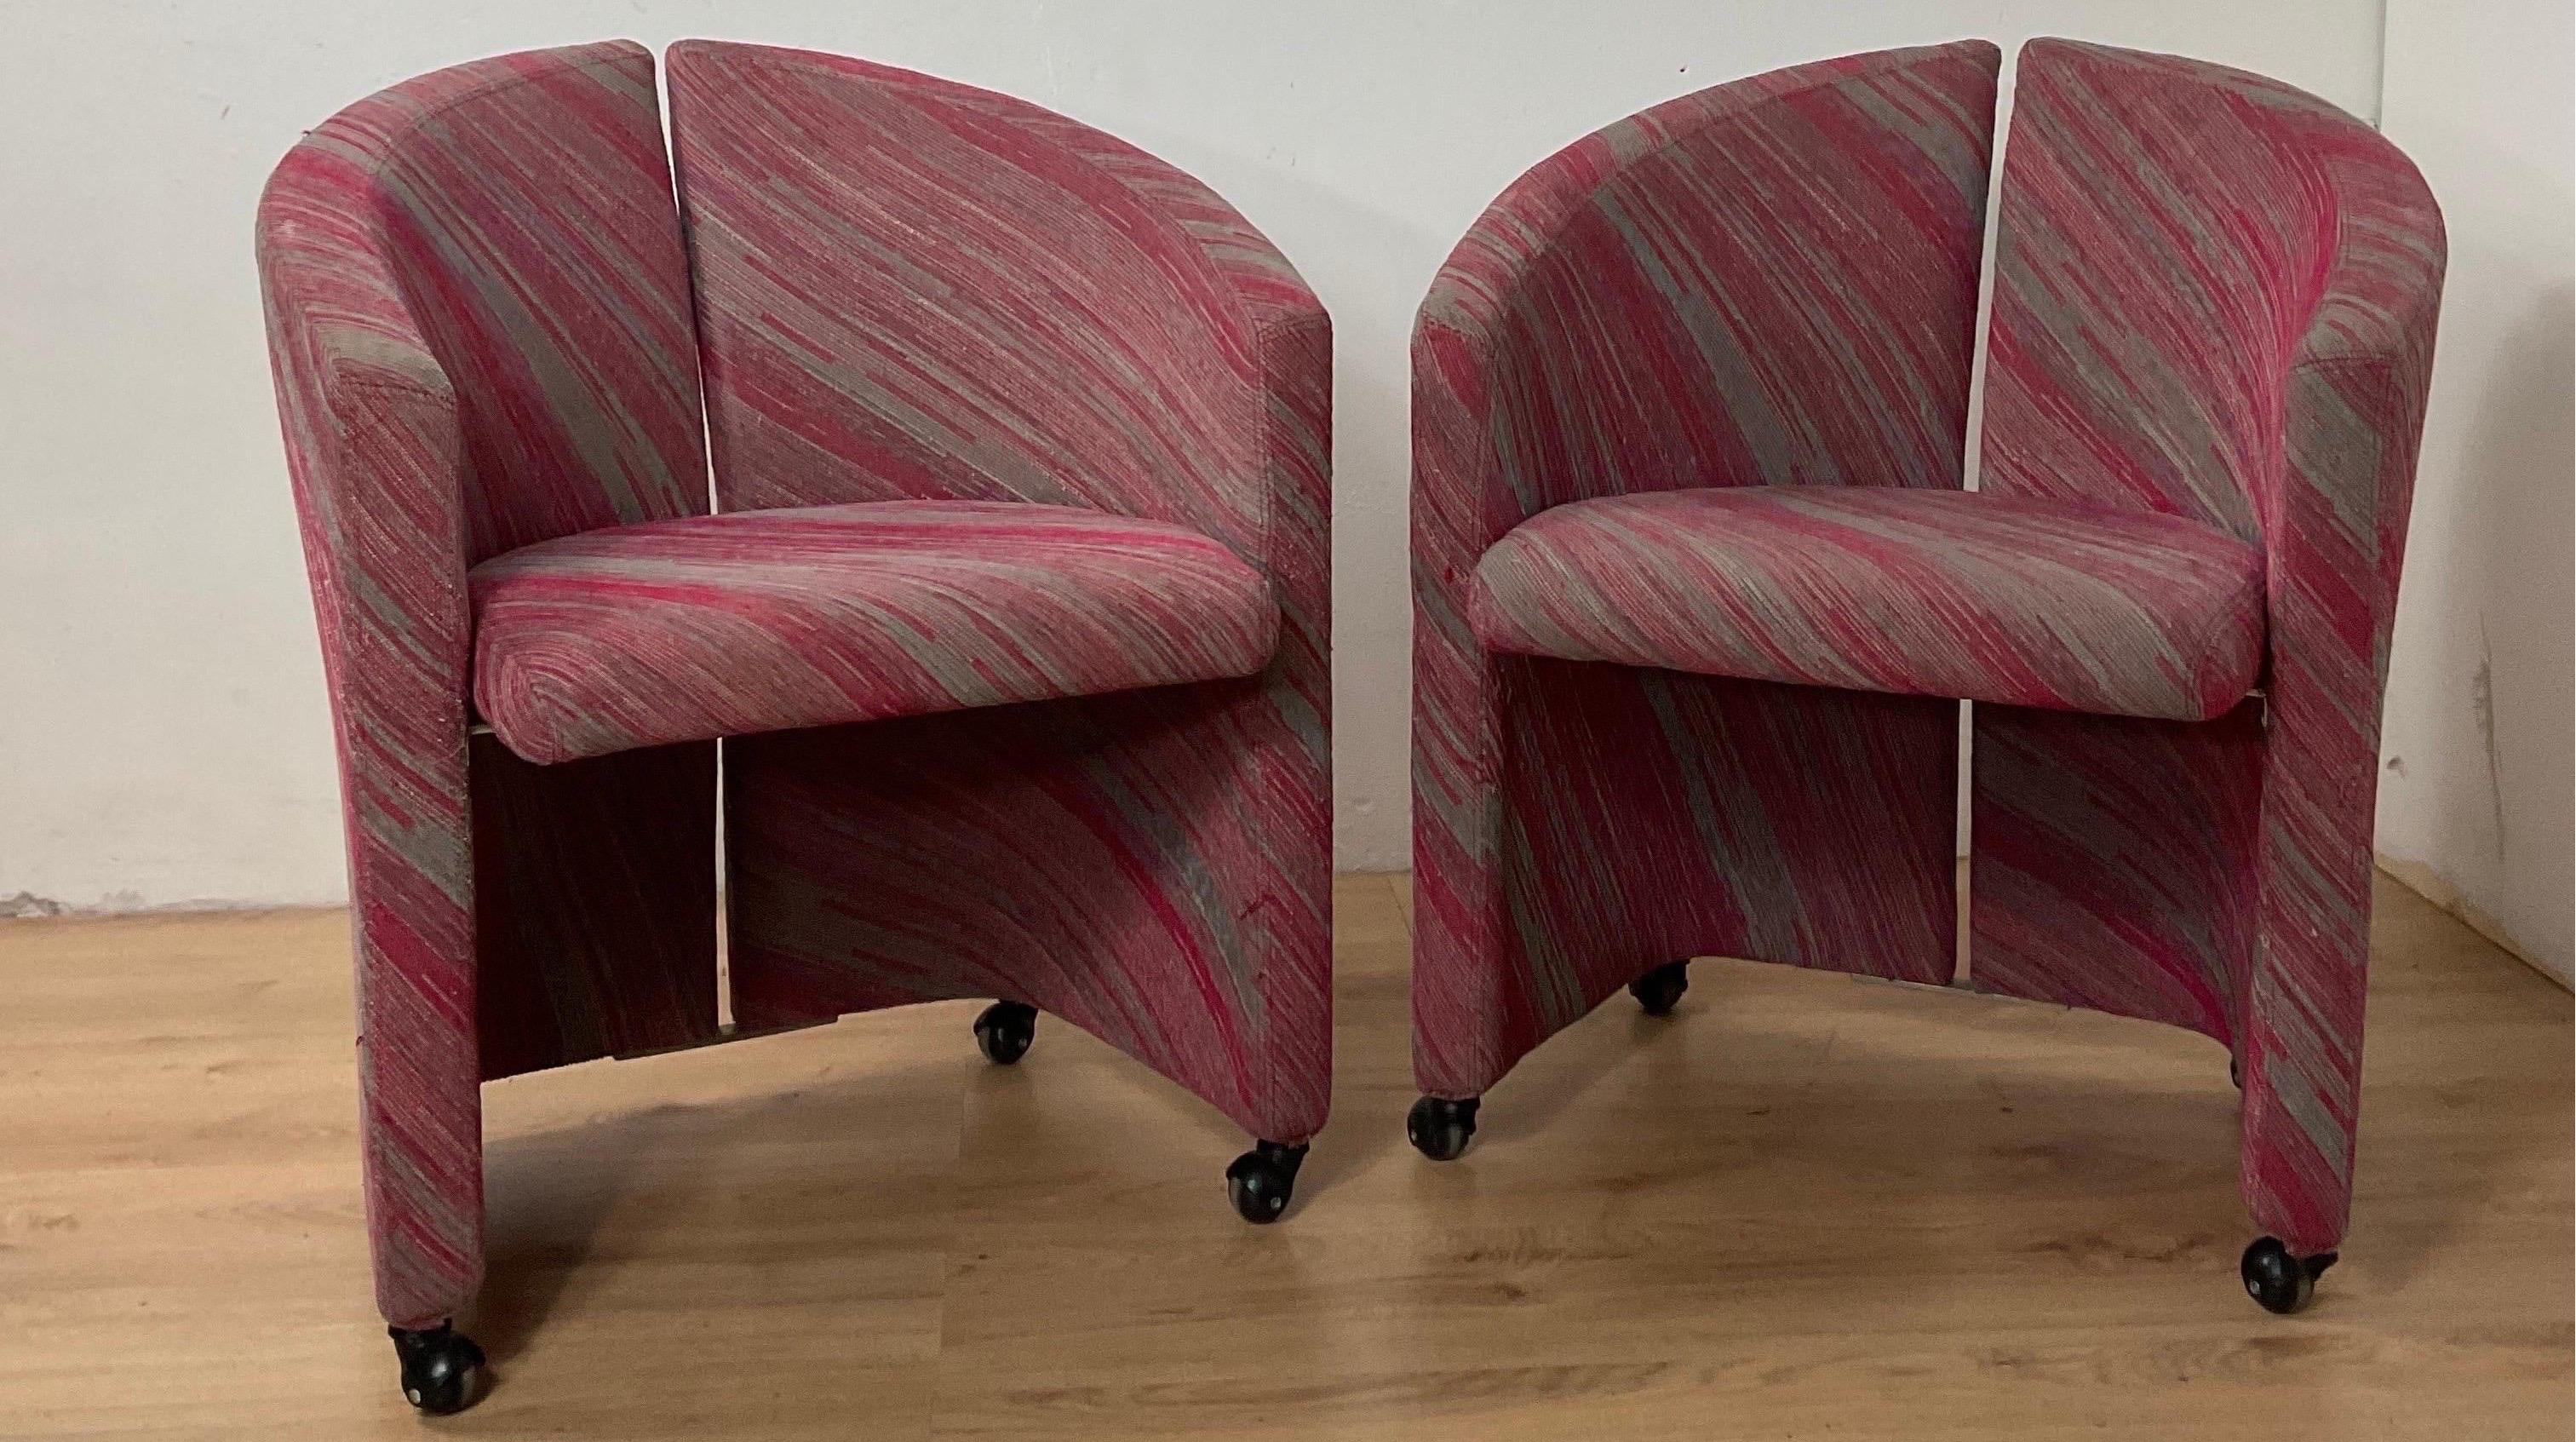 Magnificent fabric armchair from the 70s of the famous manufacturer Saporiti Italia. Very comfortable and in good condition.